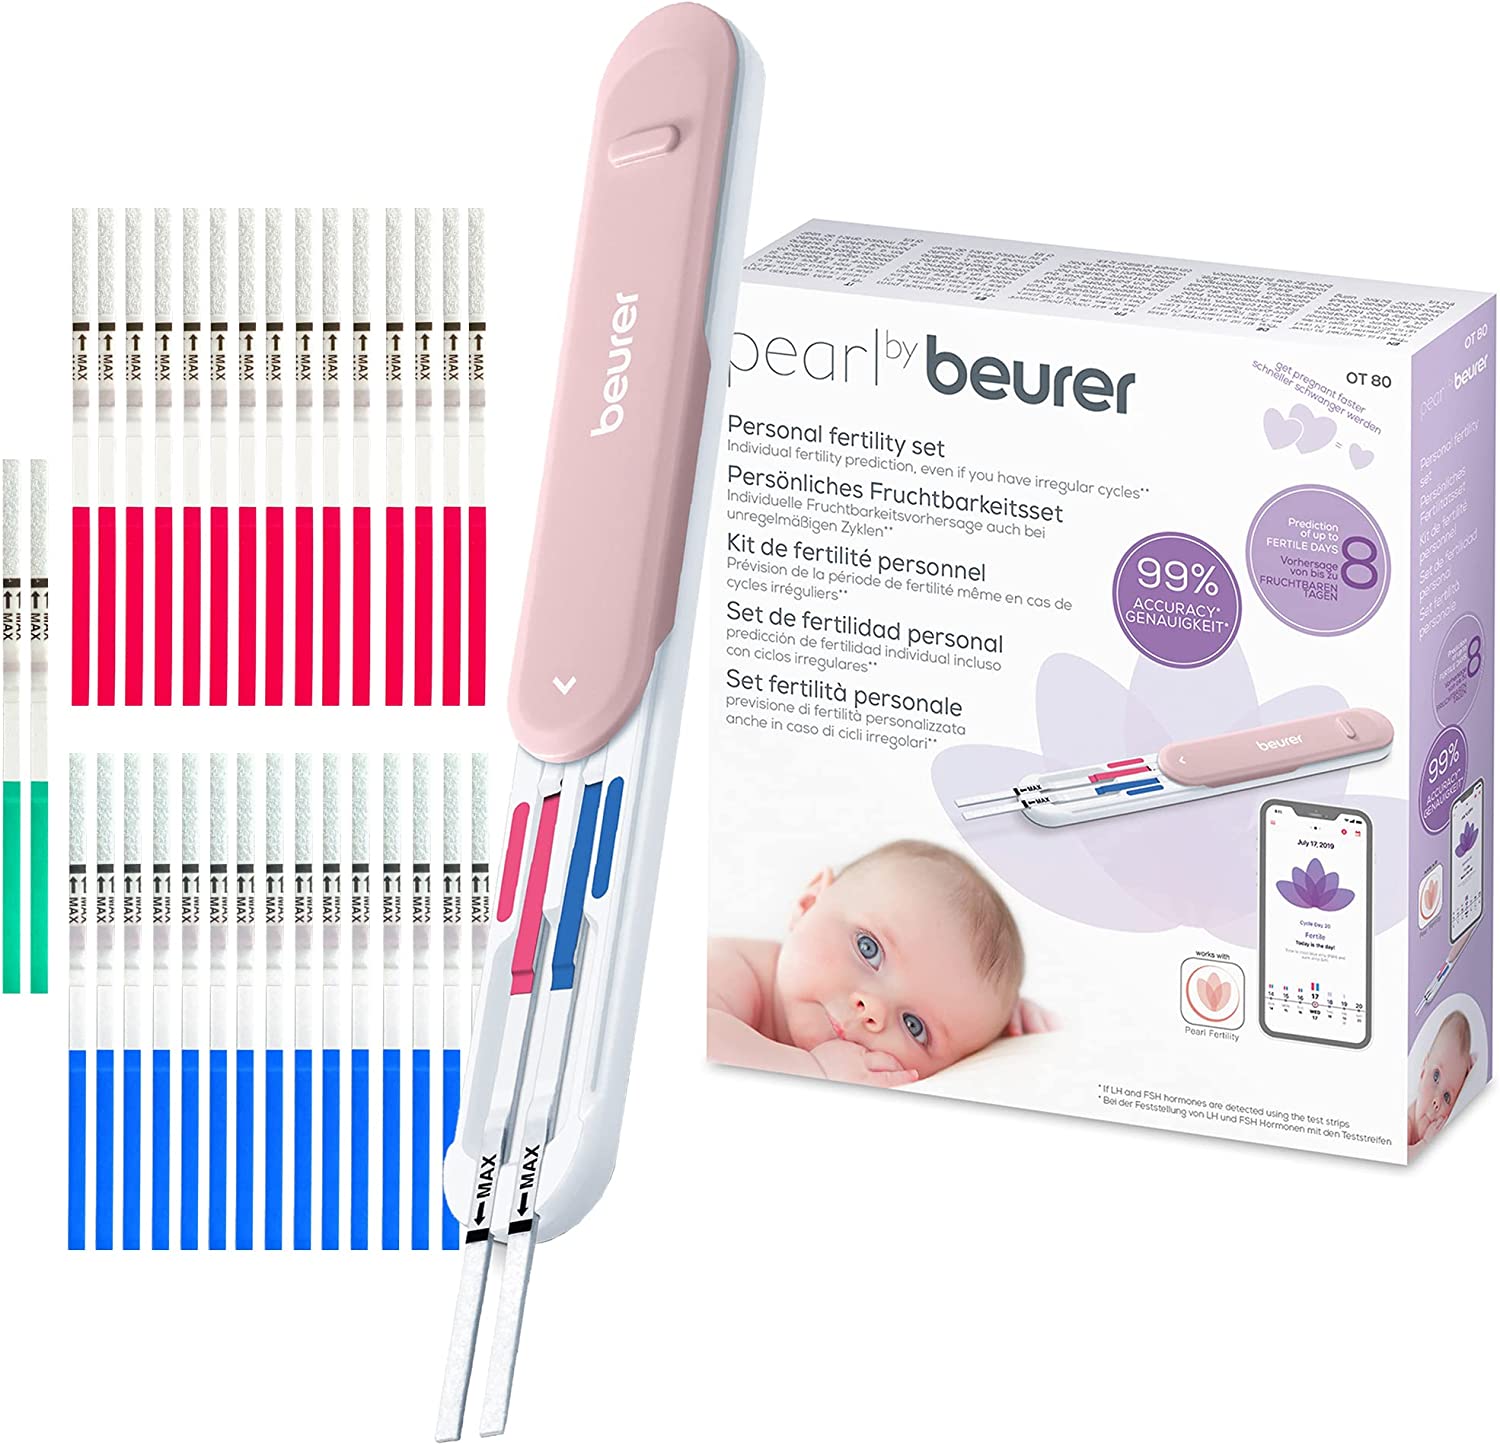 Pearl by Beurer OT 80 Ovulation Test for Women in Child Desire, Prediction of up to 8 Fertile Days, 30 Test Strips, 2 Pregnancy Tests, Measures LH & FSH